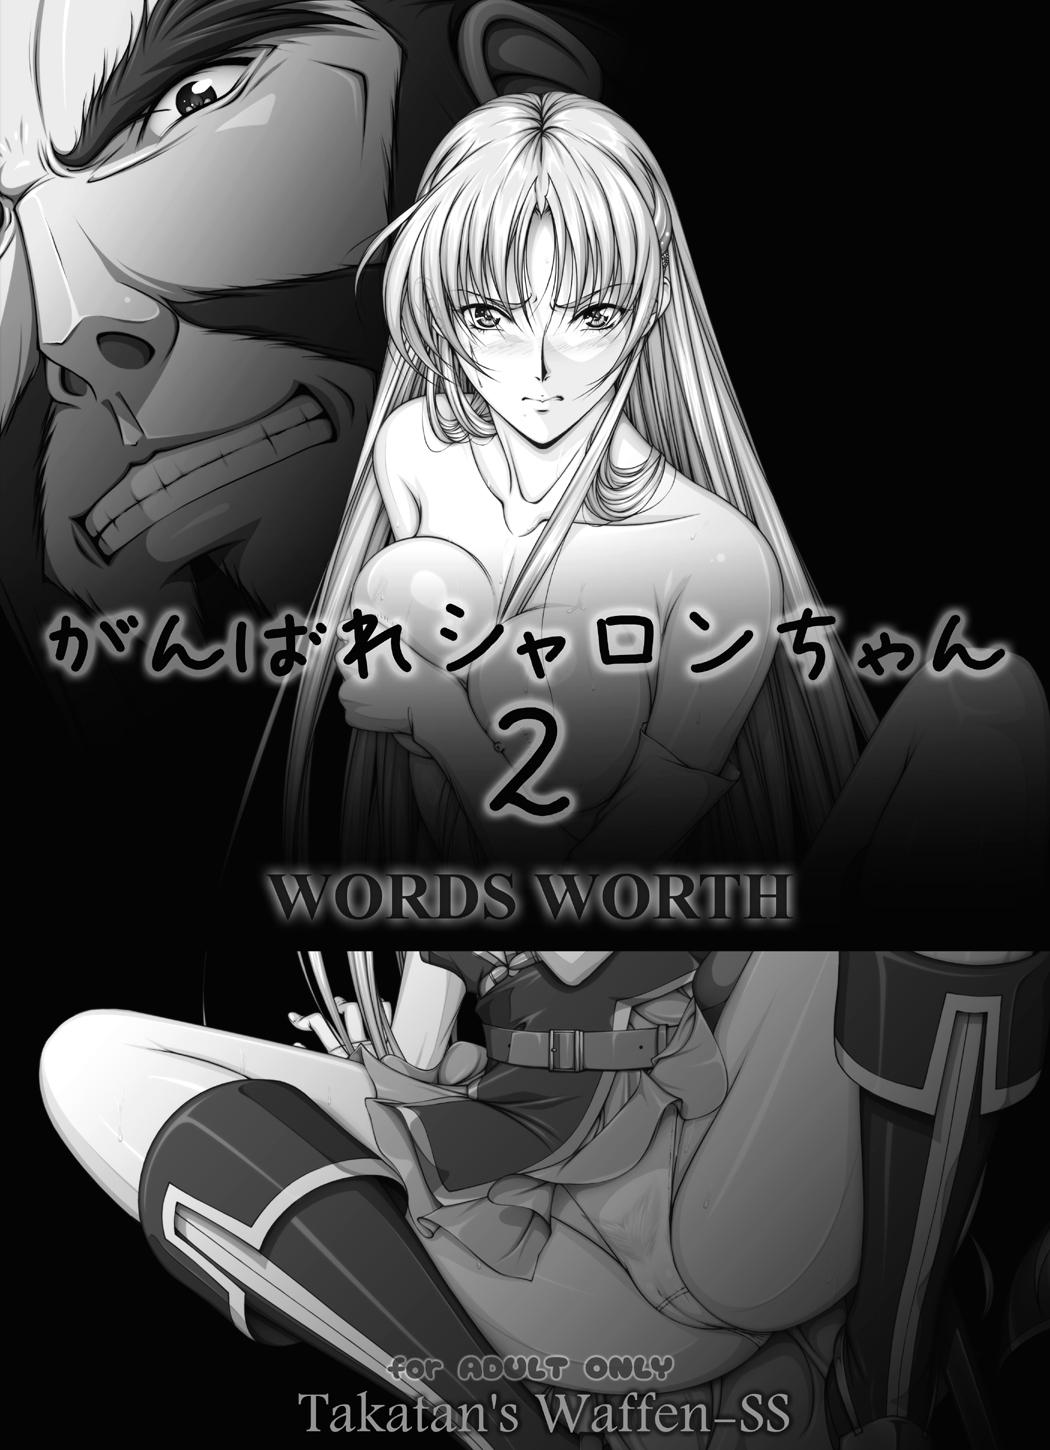 [Takatan's Waffen-SS] Fight, Sharon! 2 [Deluxe Edition] (Words Worth) +omake 54